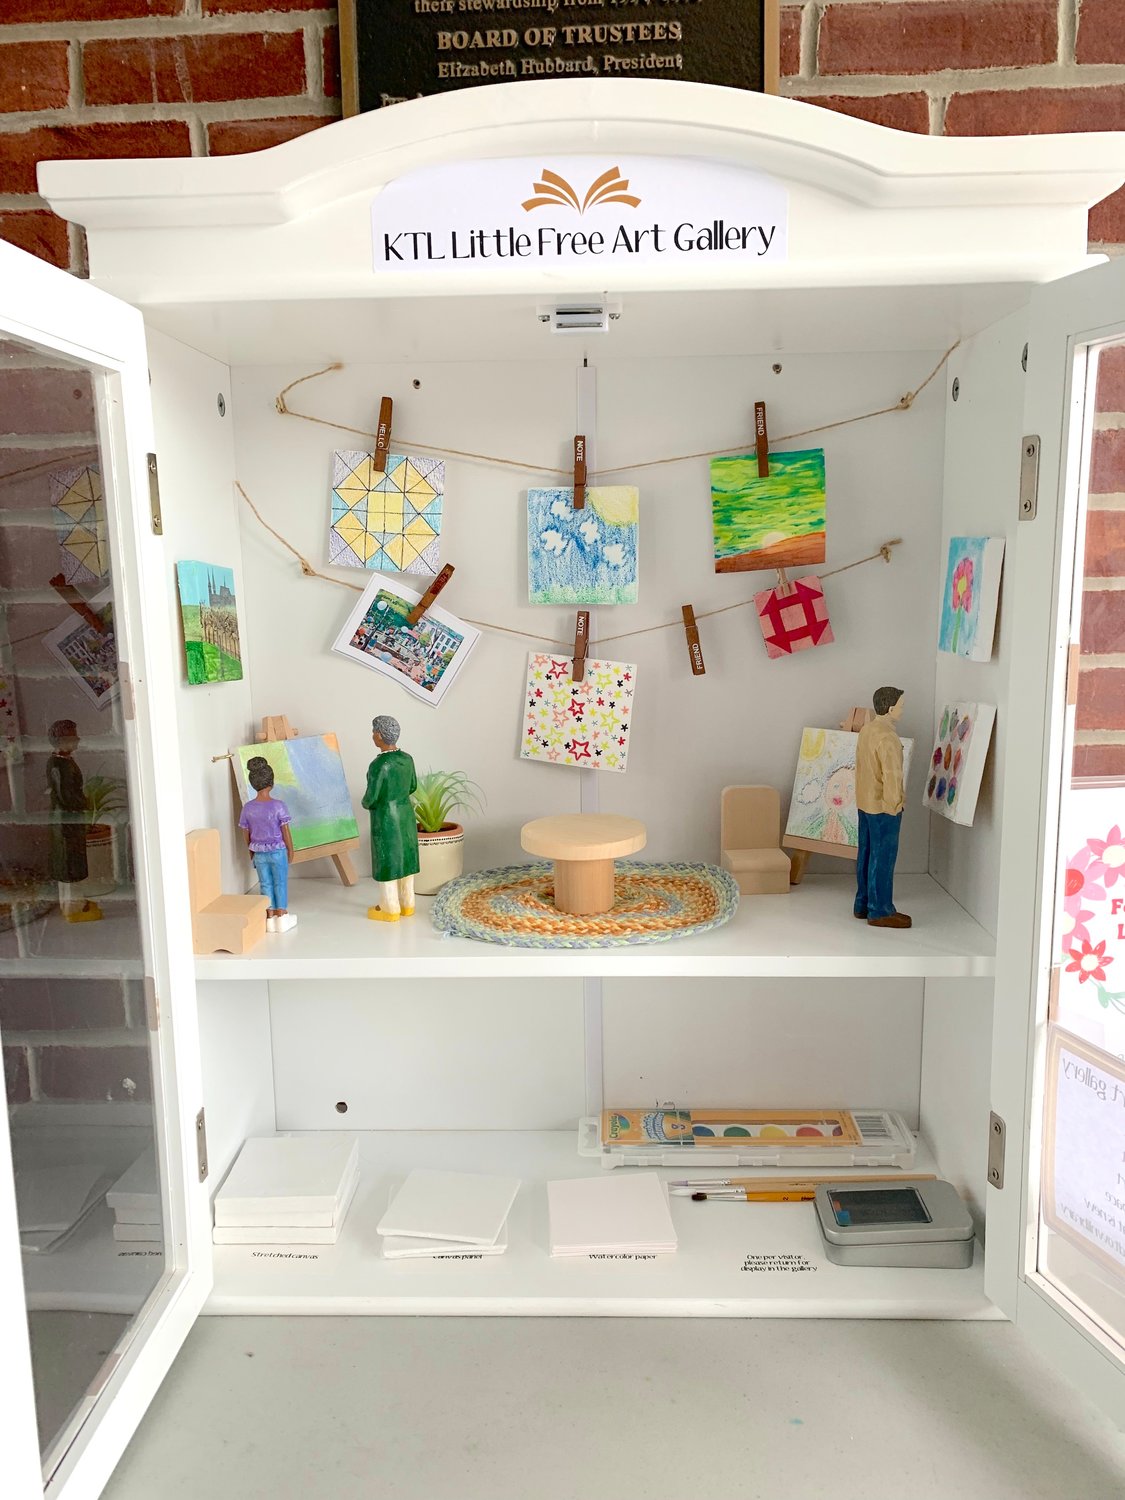 SUPPLIES — Little Free Art Gallery includes supplies for local artists to create tiny masterpieces